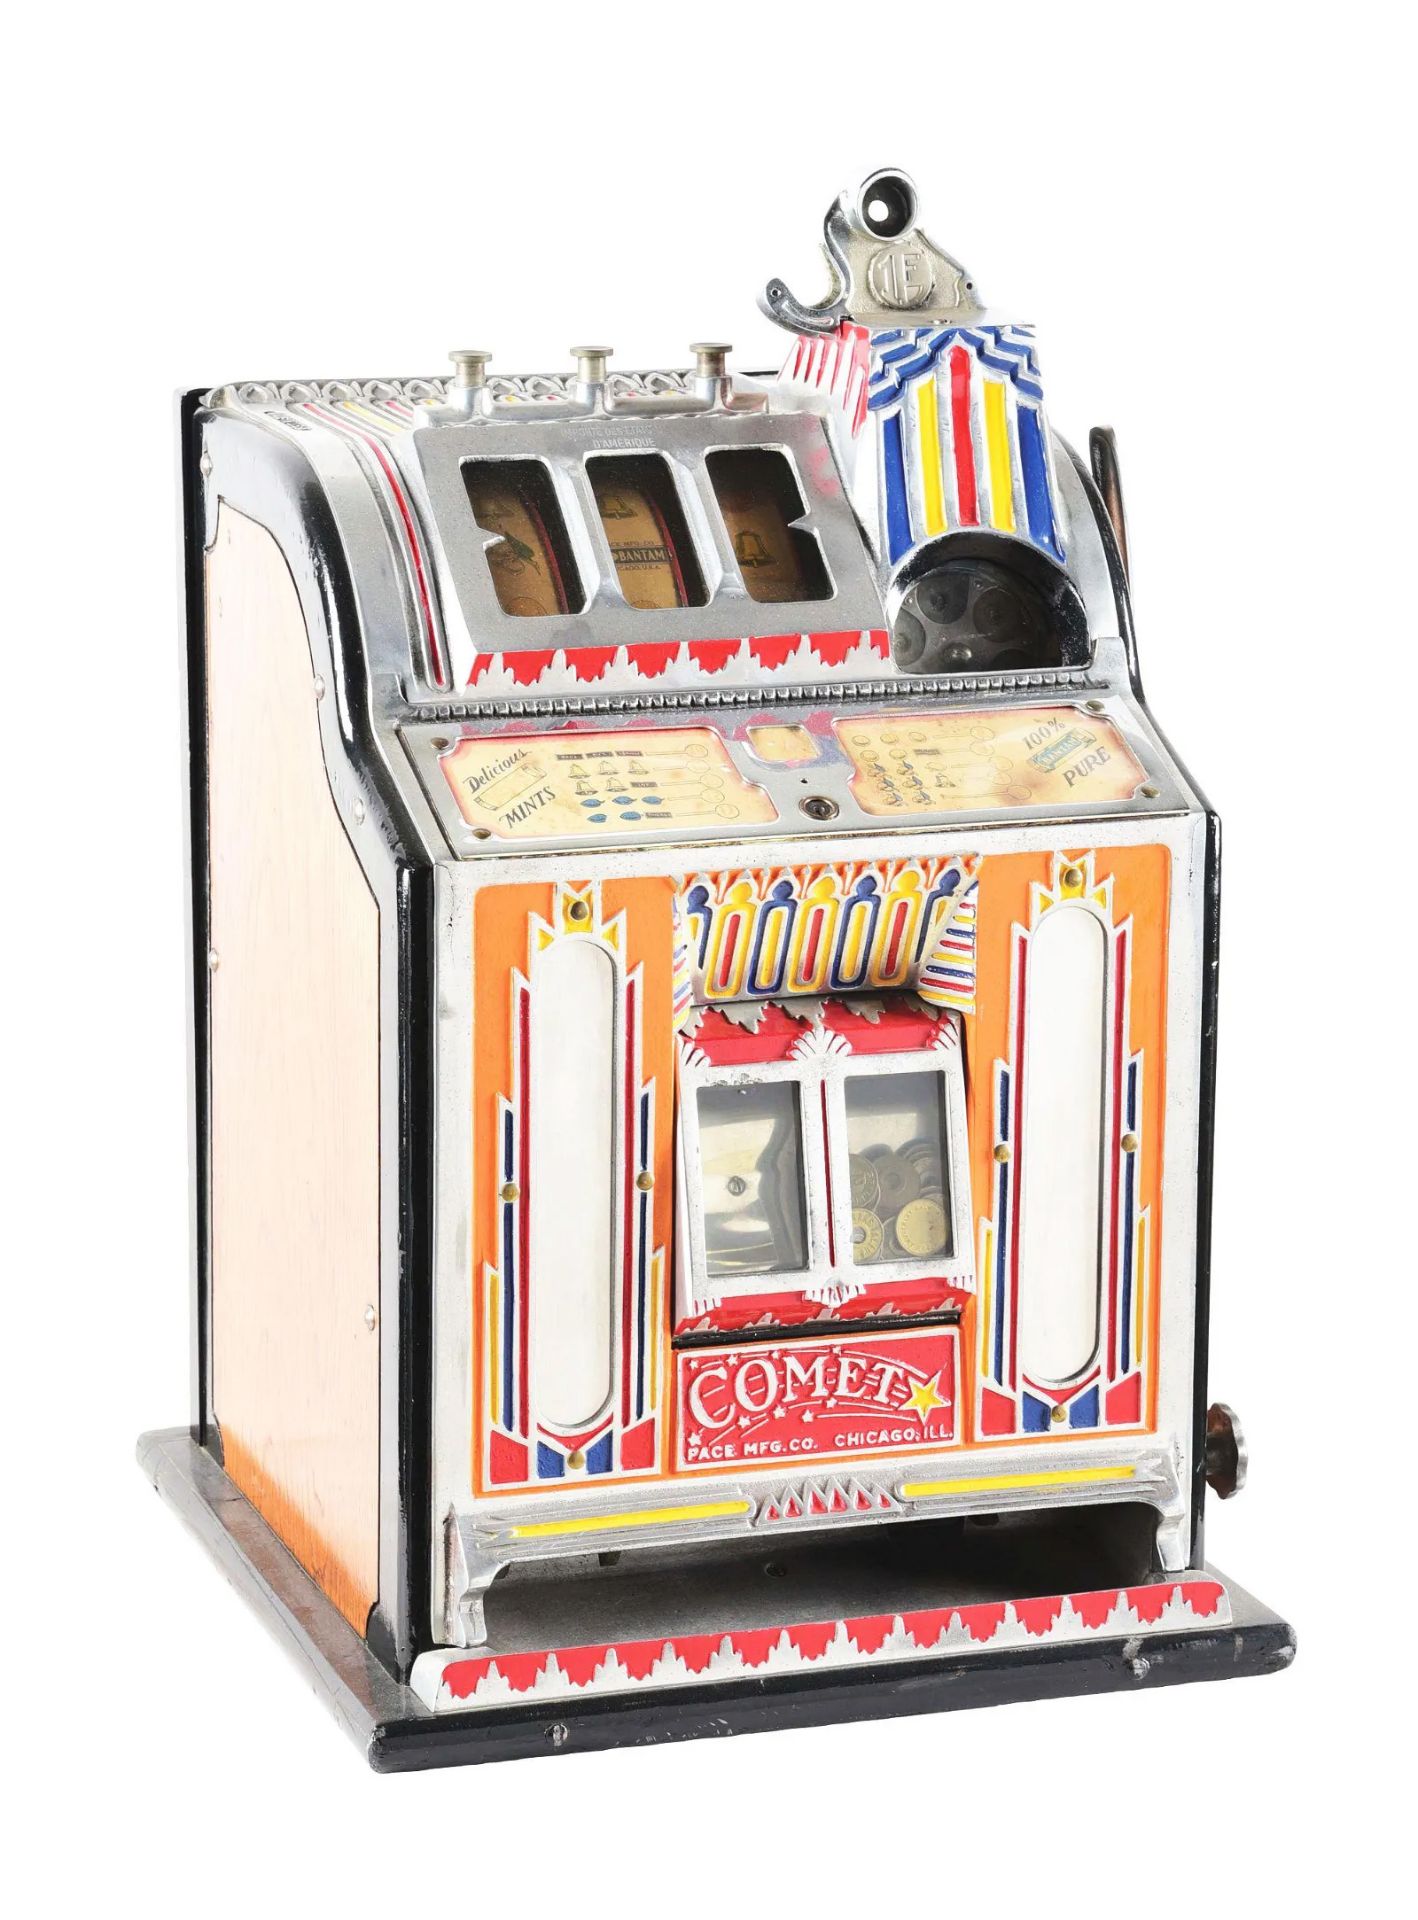 1 Franc Pace Comet Slot Machine With Skill Stop